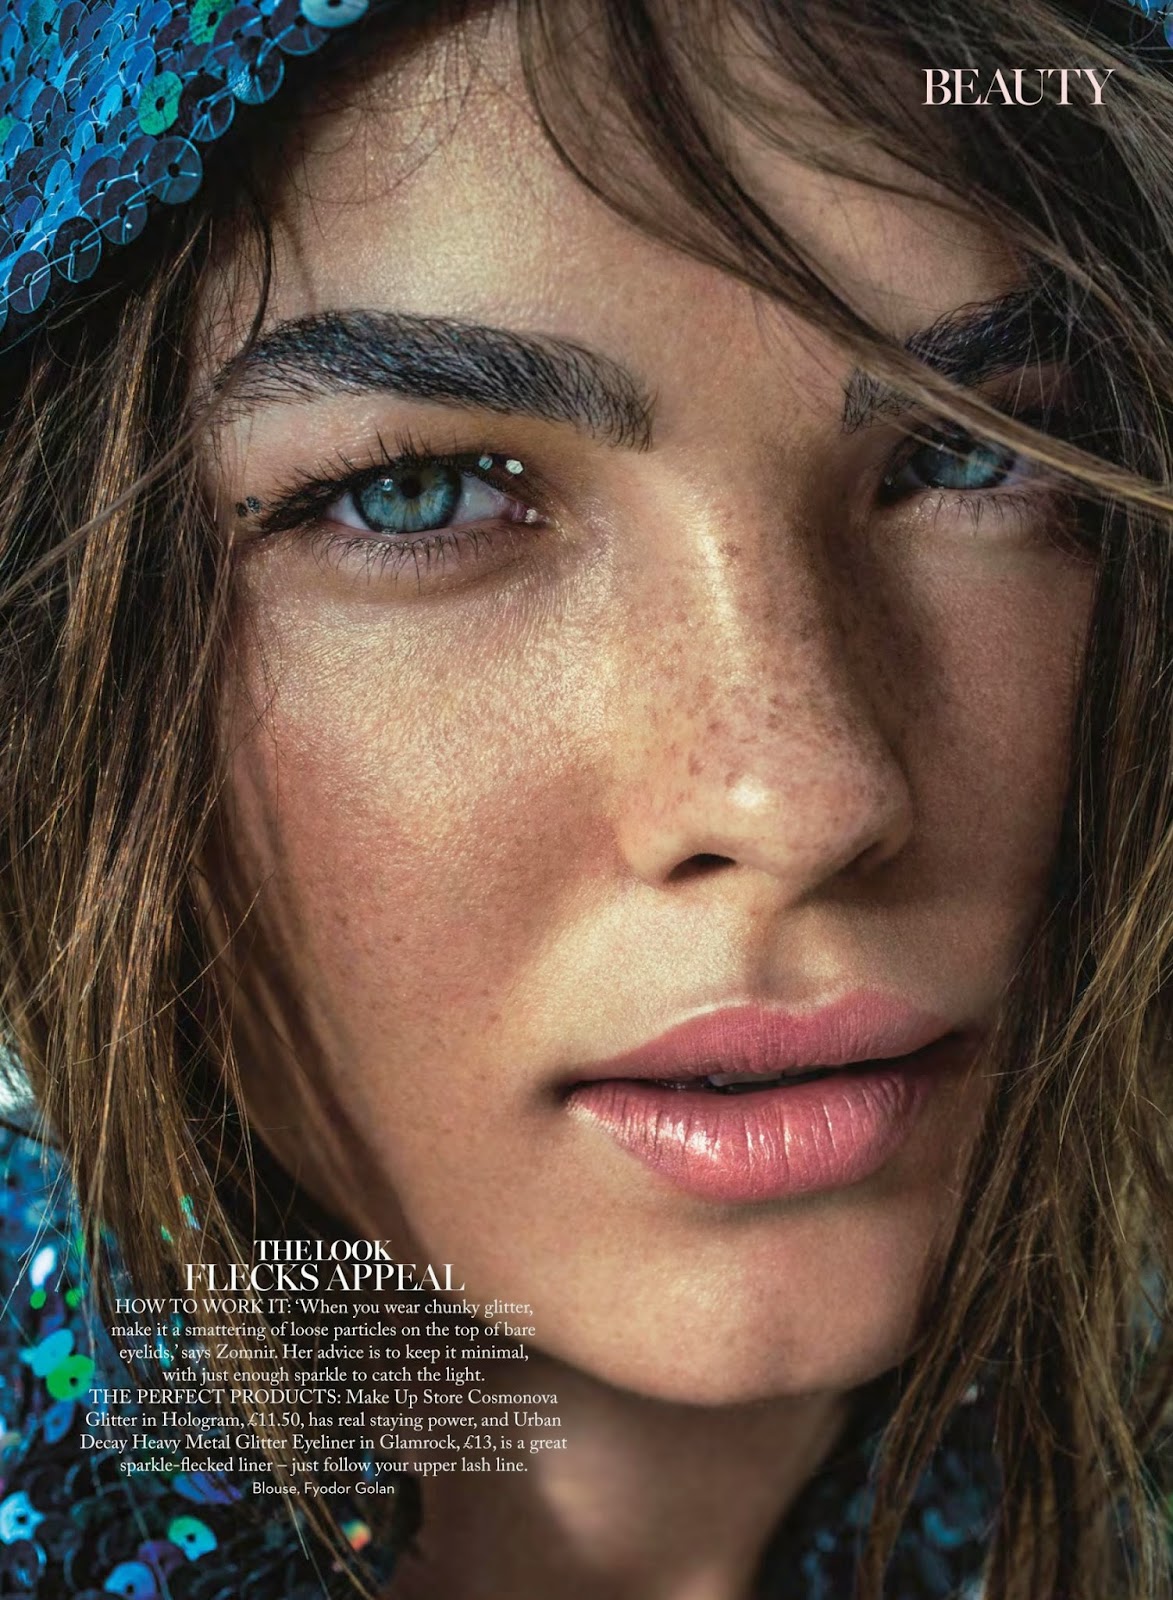 Bambi Northwood Blyth by Enrique Badulescu for Marie Claire UK October 2014